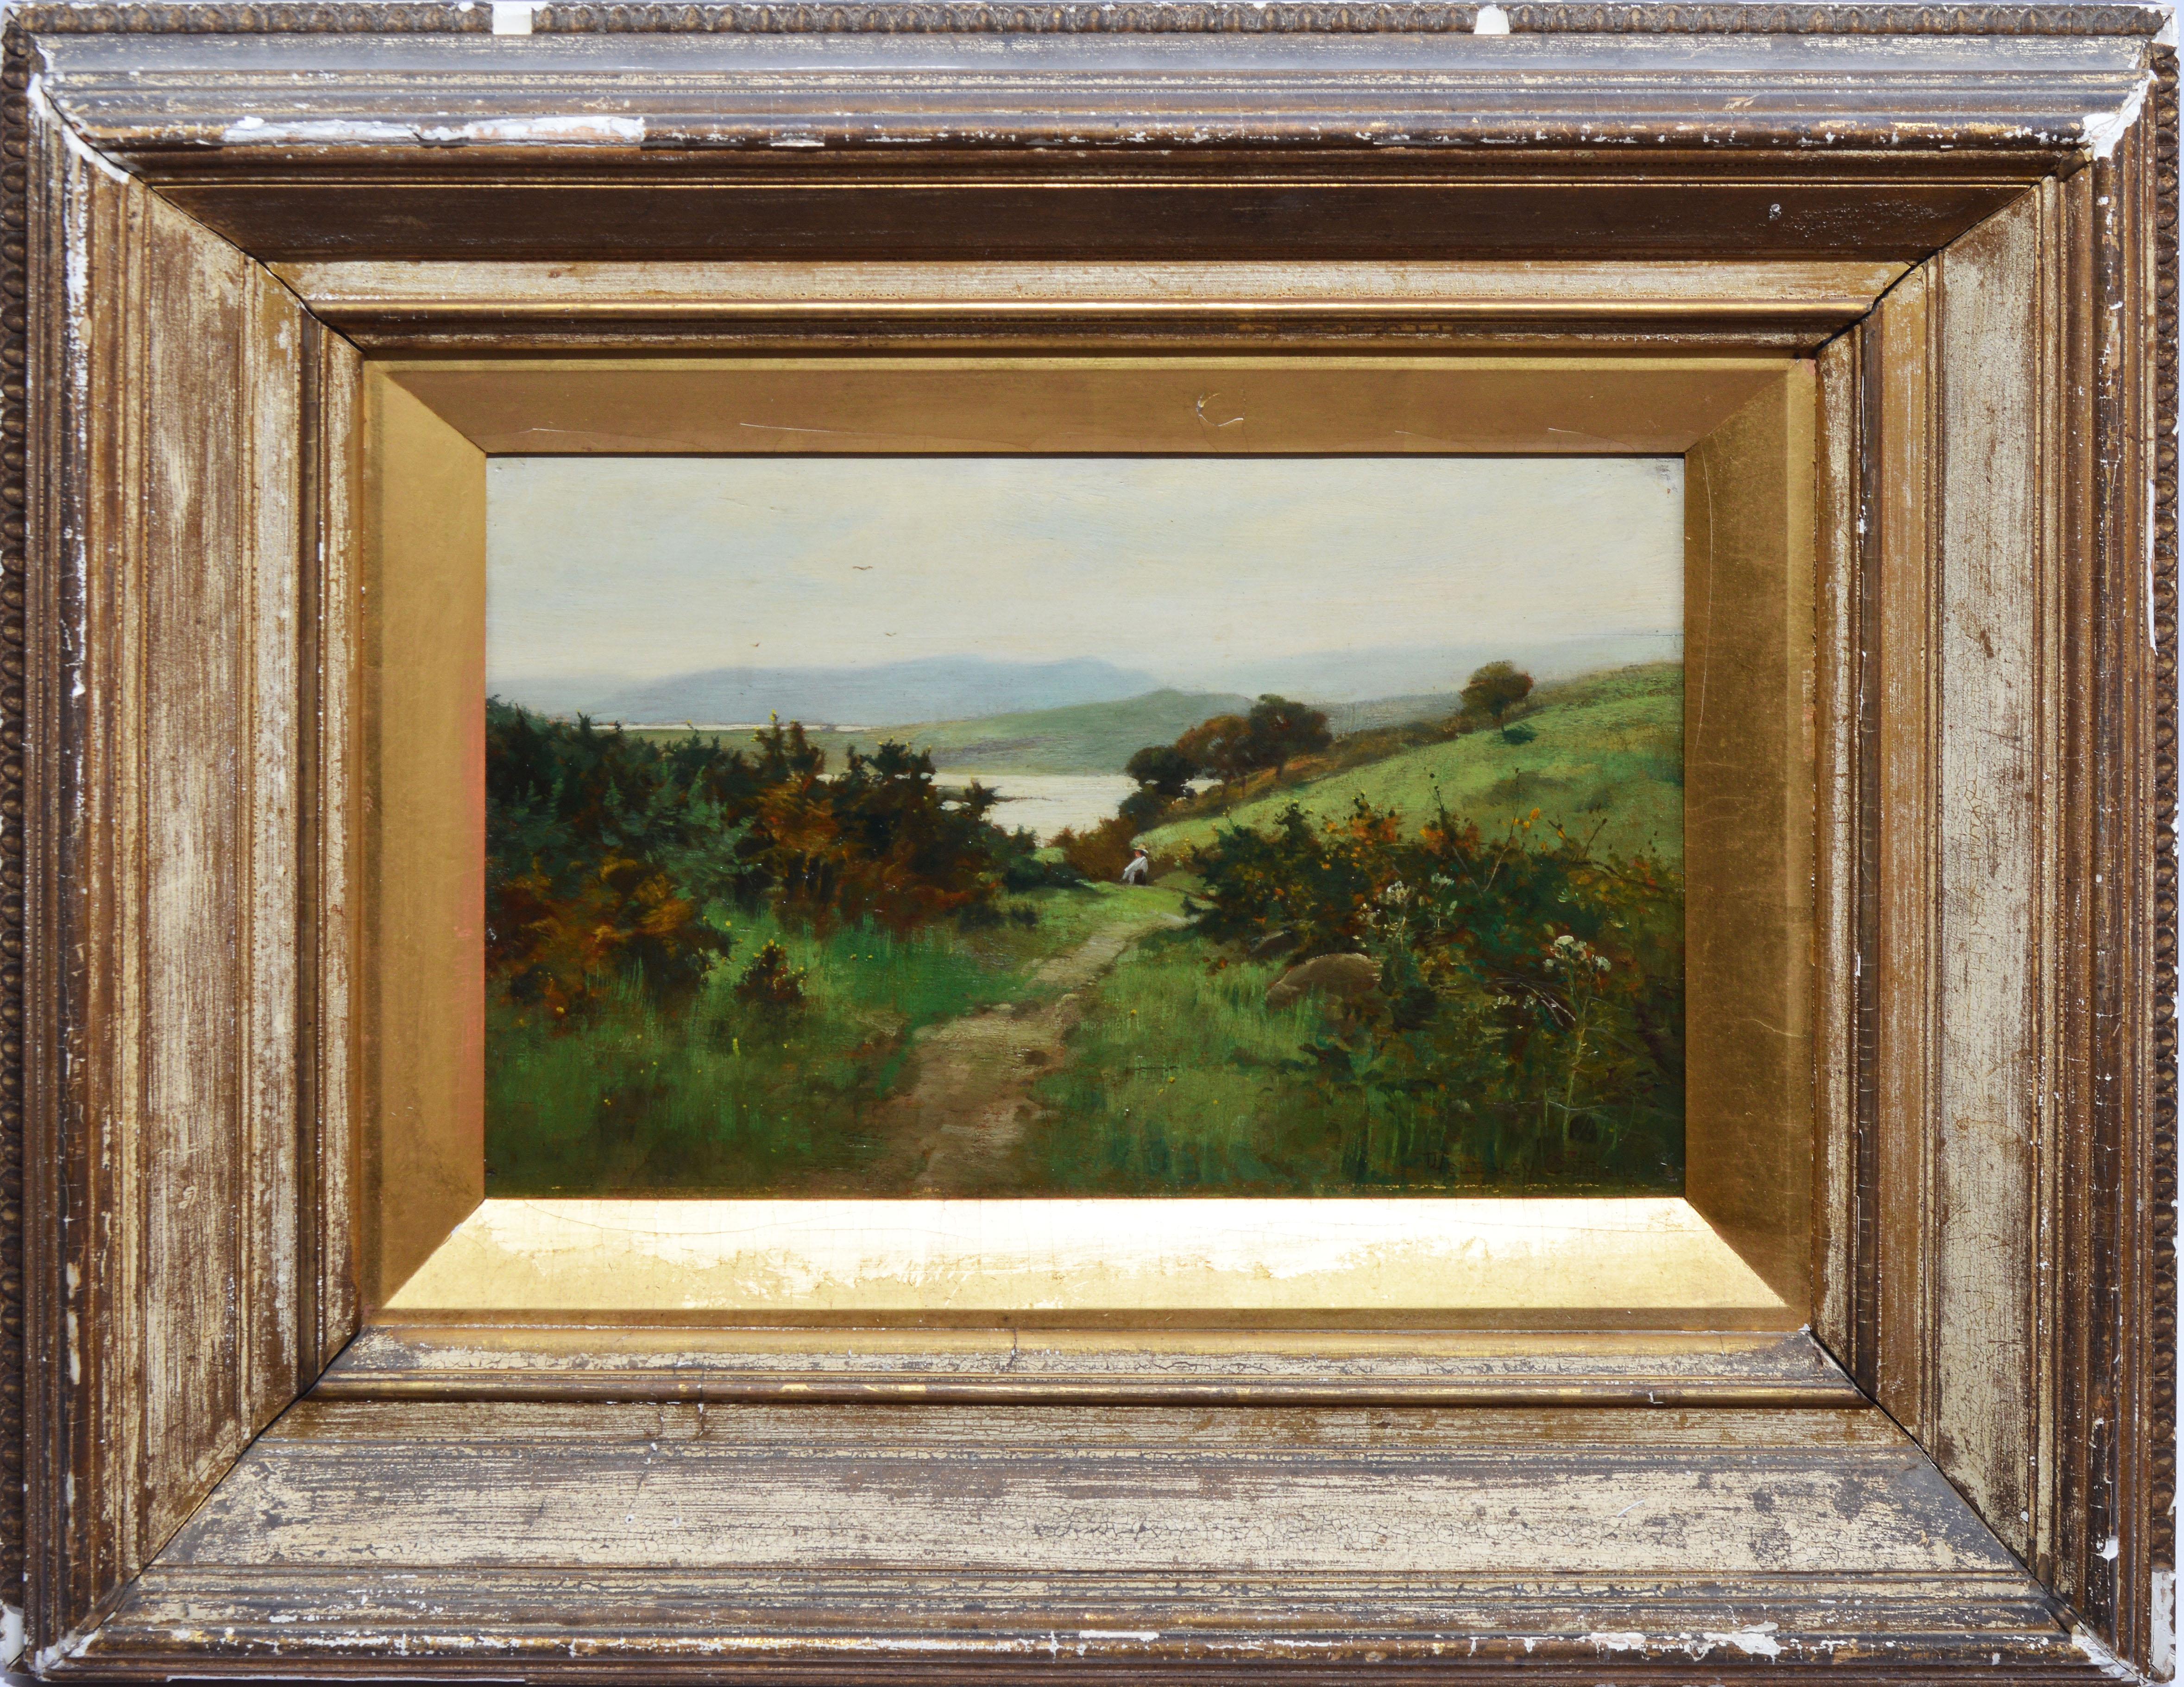 Antique English landscape painting with wild flowers by Arthur Wellesley Cottrell  (fl. 1872-1913).  Oil on board, circa 1880.  Signed lower right.  Displayed in a giltwood frame.  Image, 12"L x 8"H, overall 21"L x 17"H.